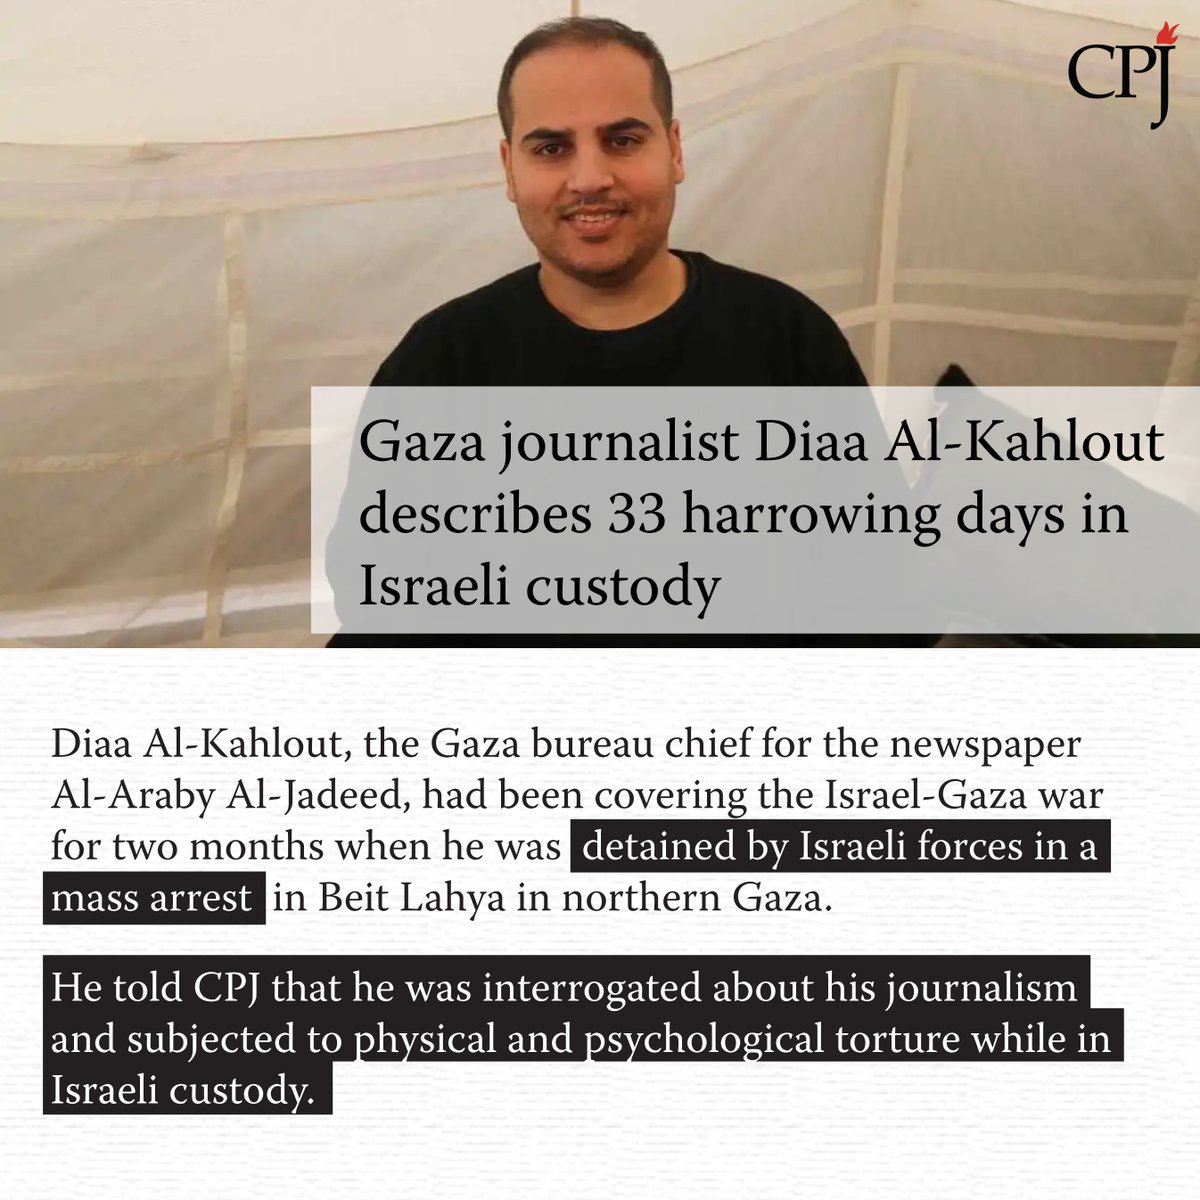 Diaa Al-Kahlout, the Gaza bureau chief for the newspaper Al-Araby Al-Jadeed, was detained by Israeli forces in a mass arrest in Beit Lahya in northern Gaza in December. While in Israeli custody, he was interrogated about his journalism and subjected to physical and psychological…